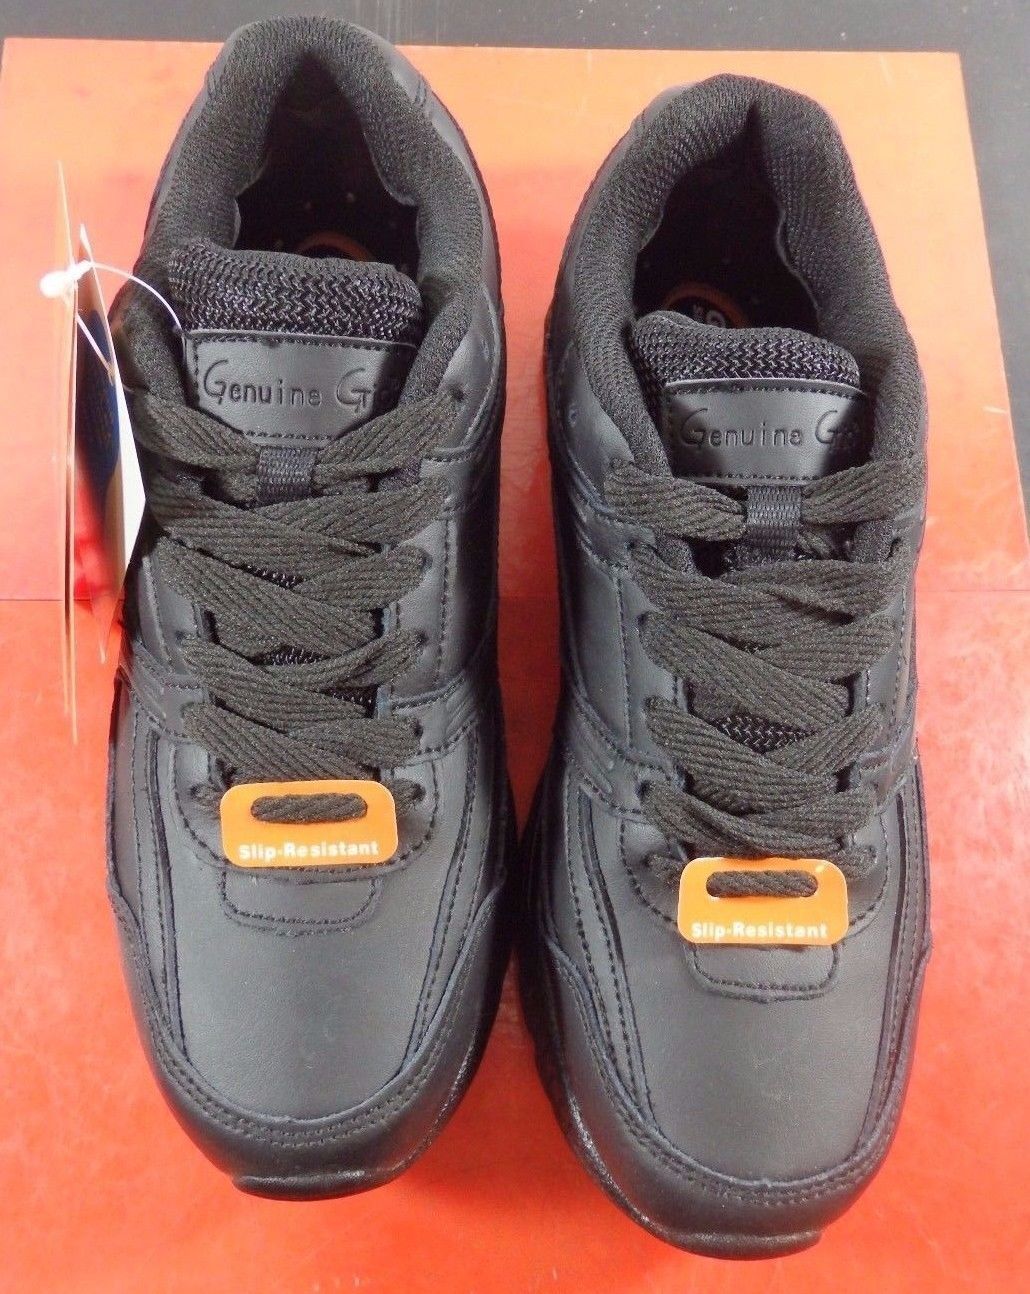 Genuine Opening large release sale Grip 1110 Fort Worth Mall Plain Work Shoes Women's 7 M Black Size